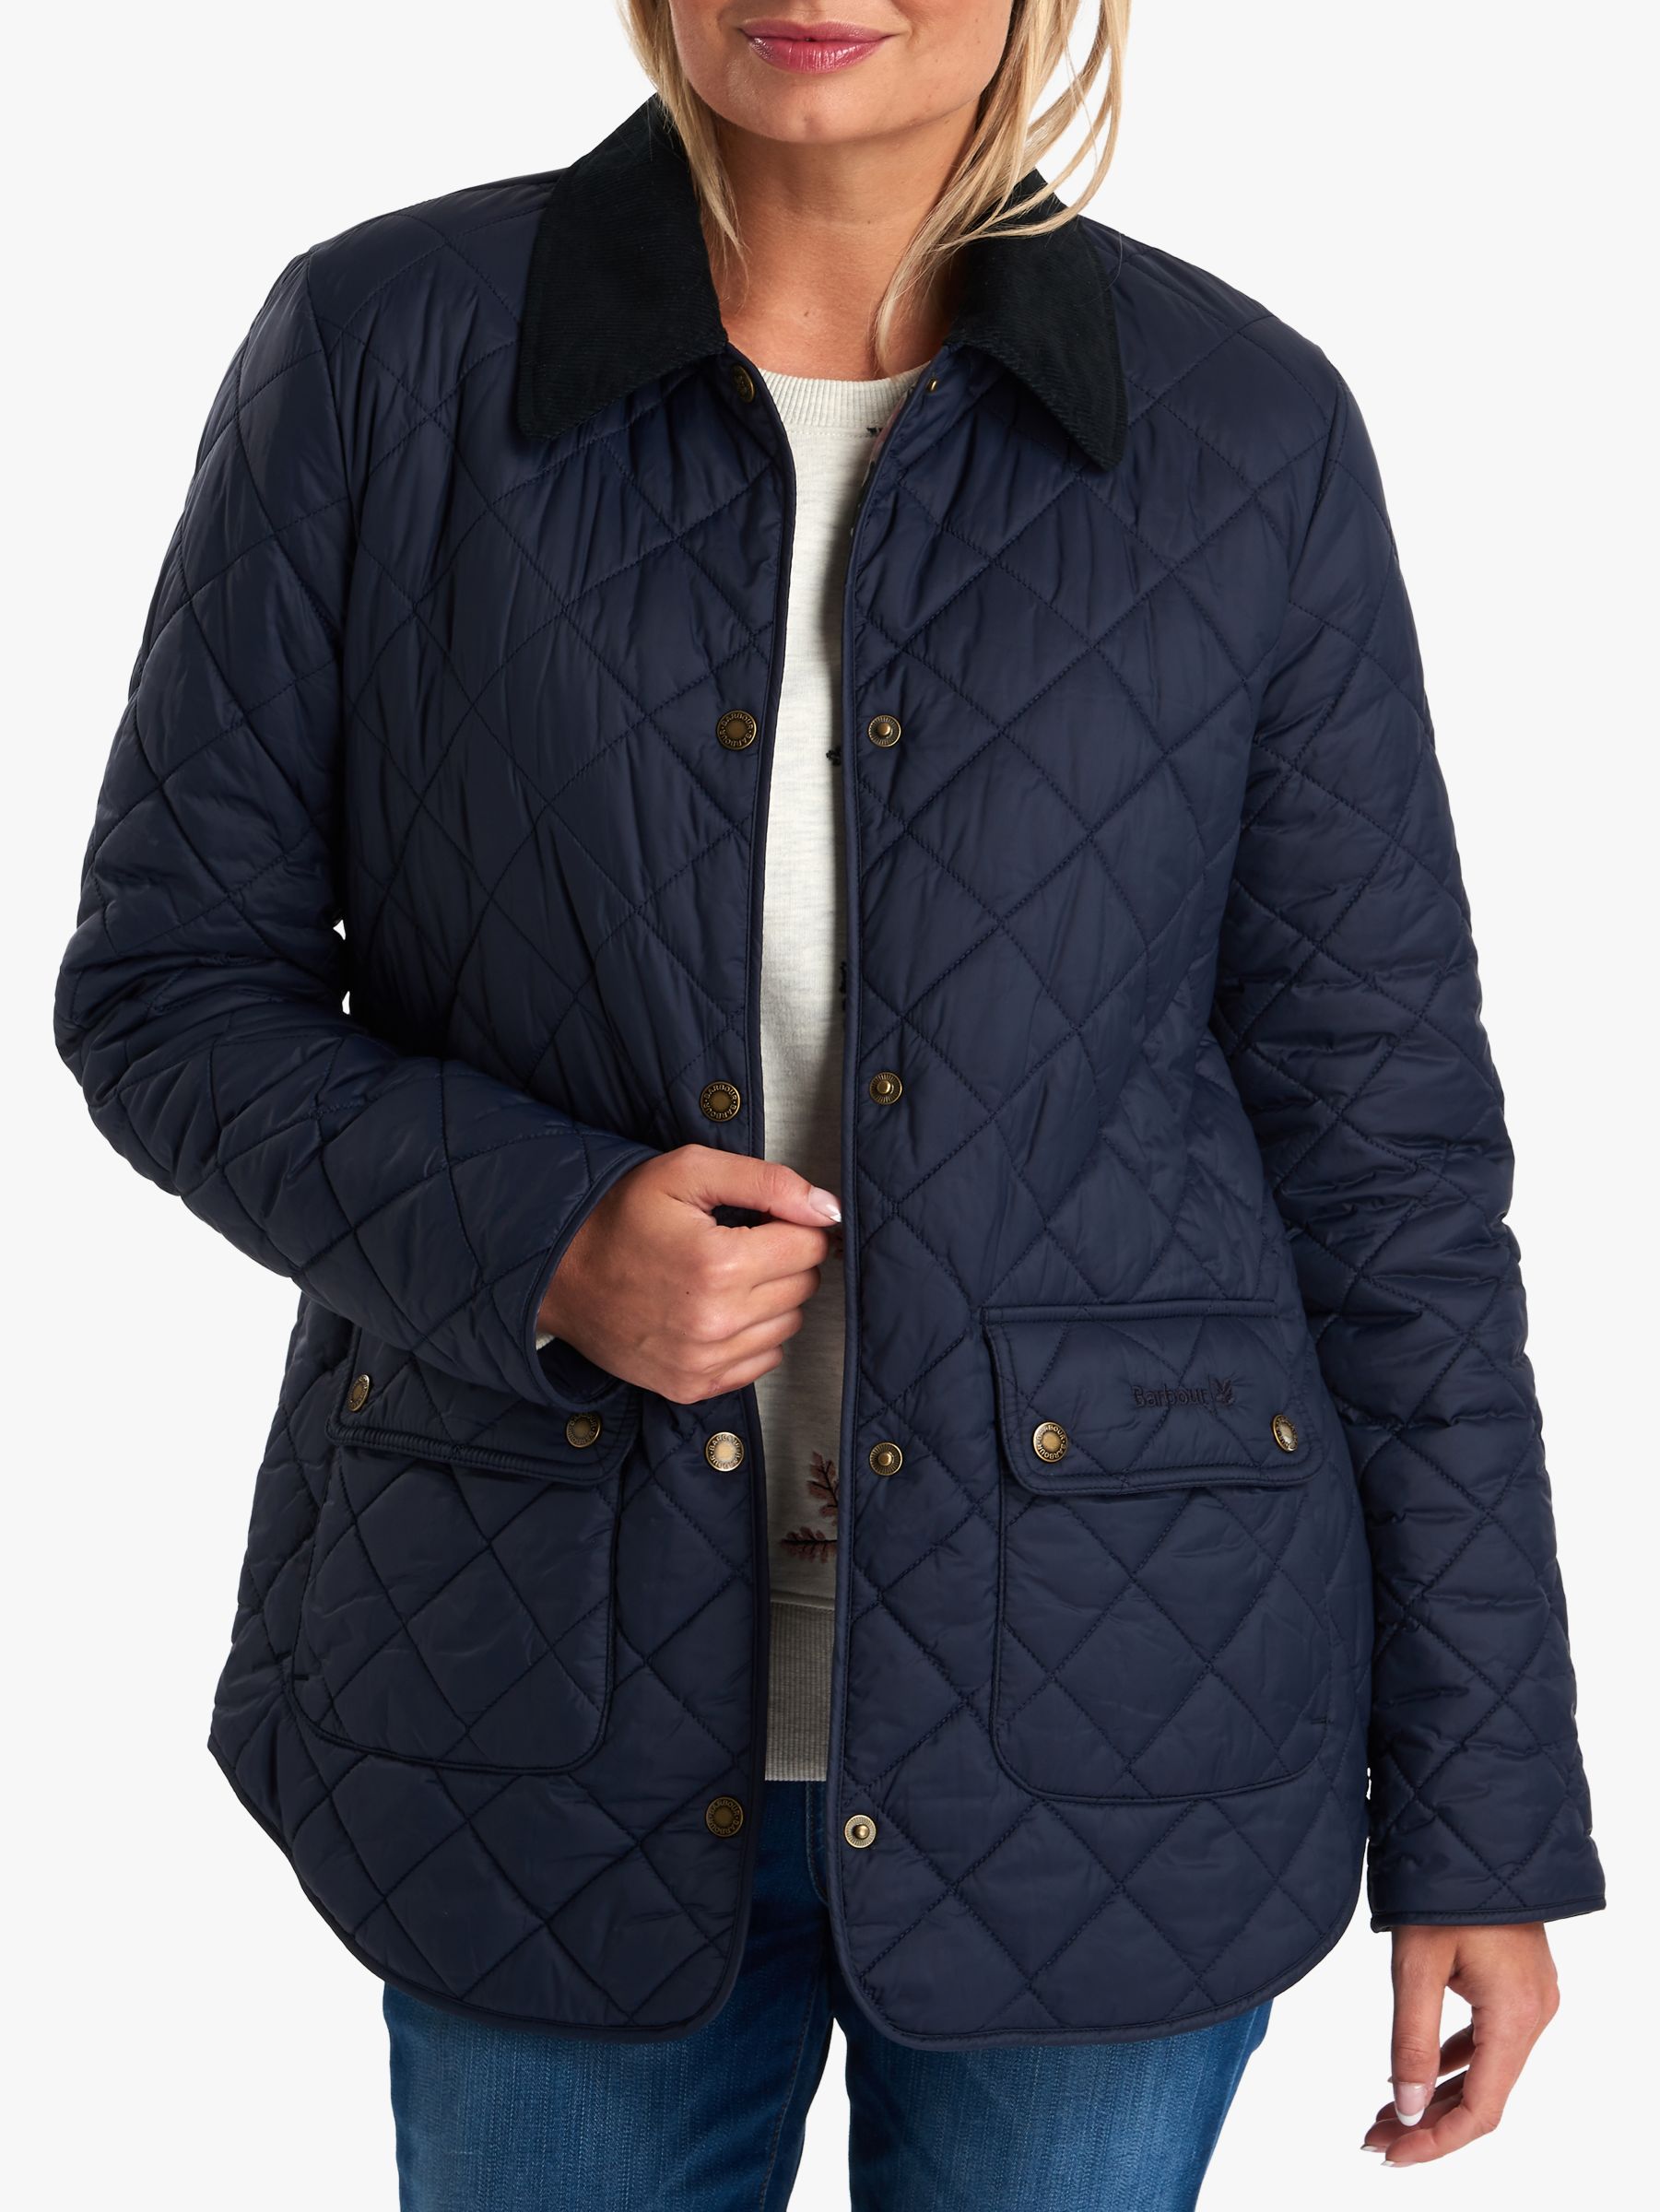 Barbour National Trust Moors Quilted Jacket, Navy, 12